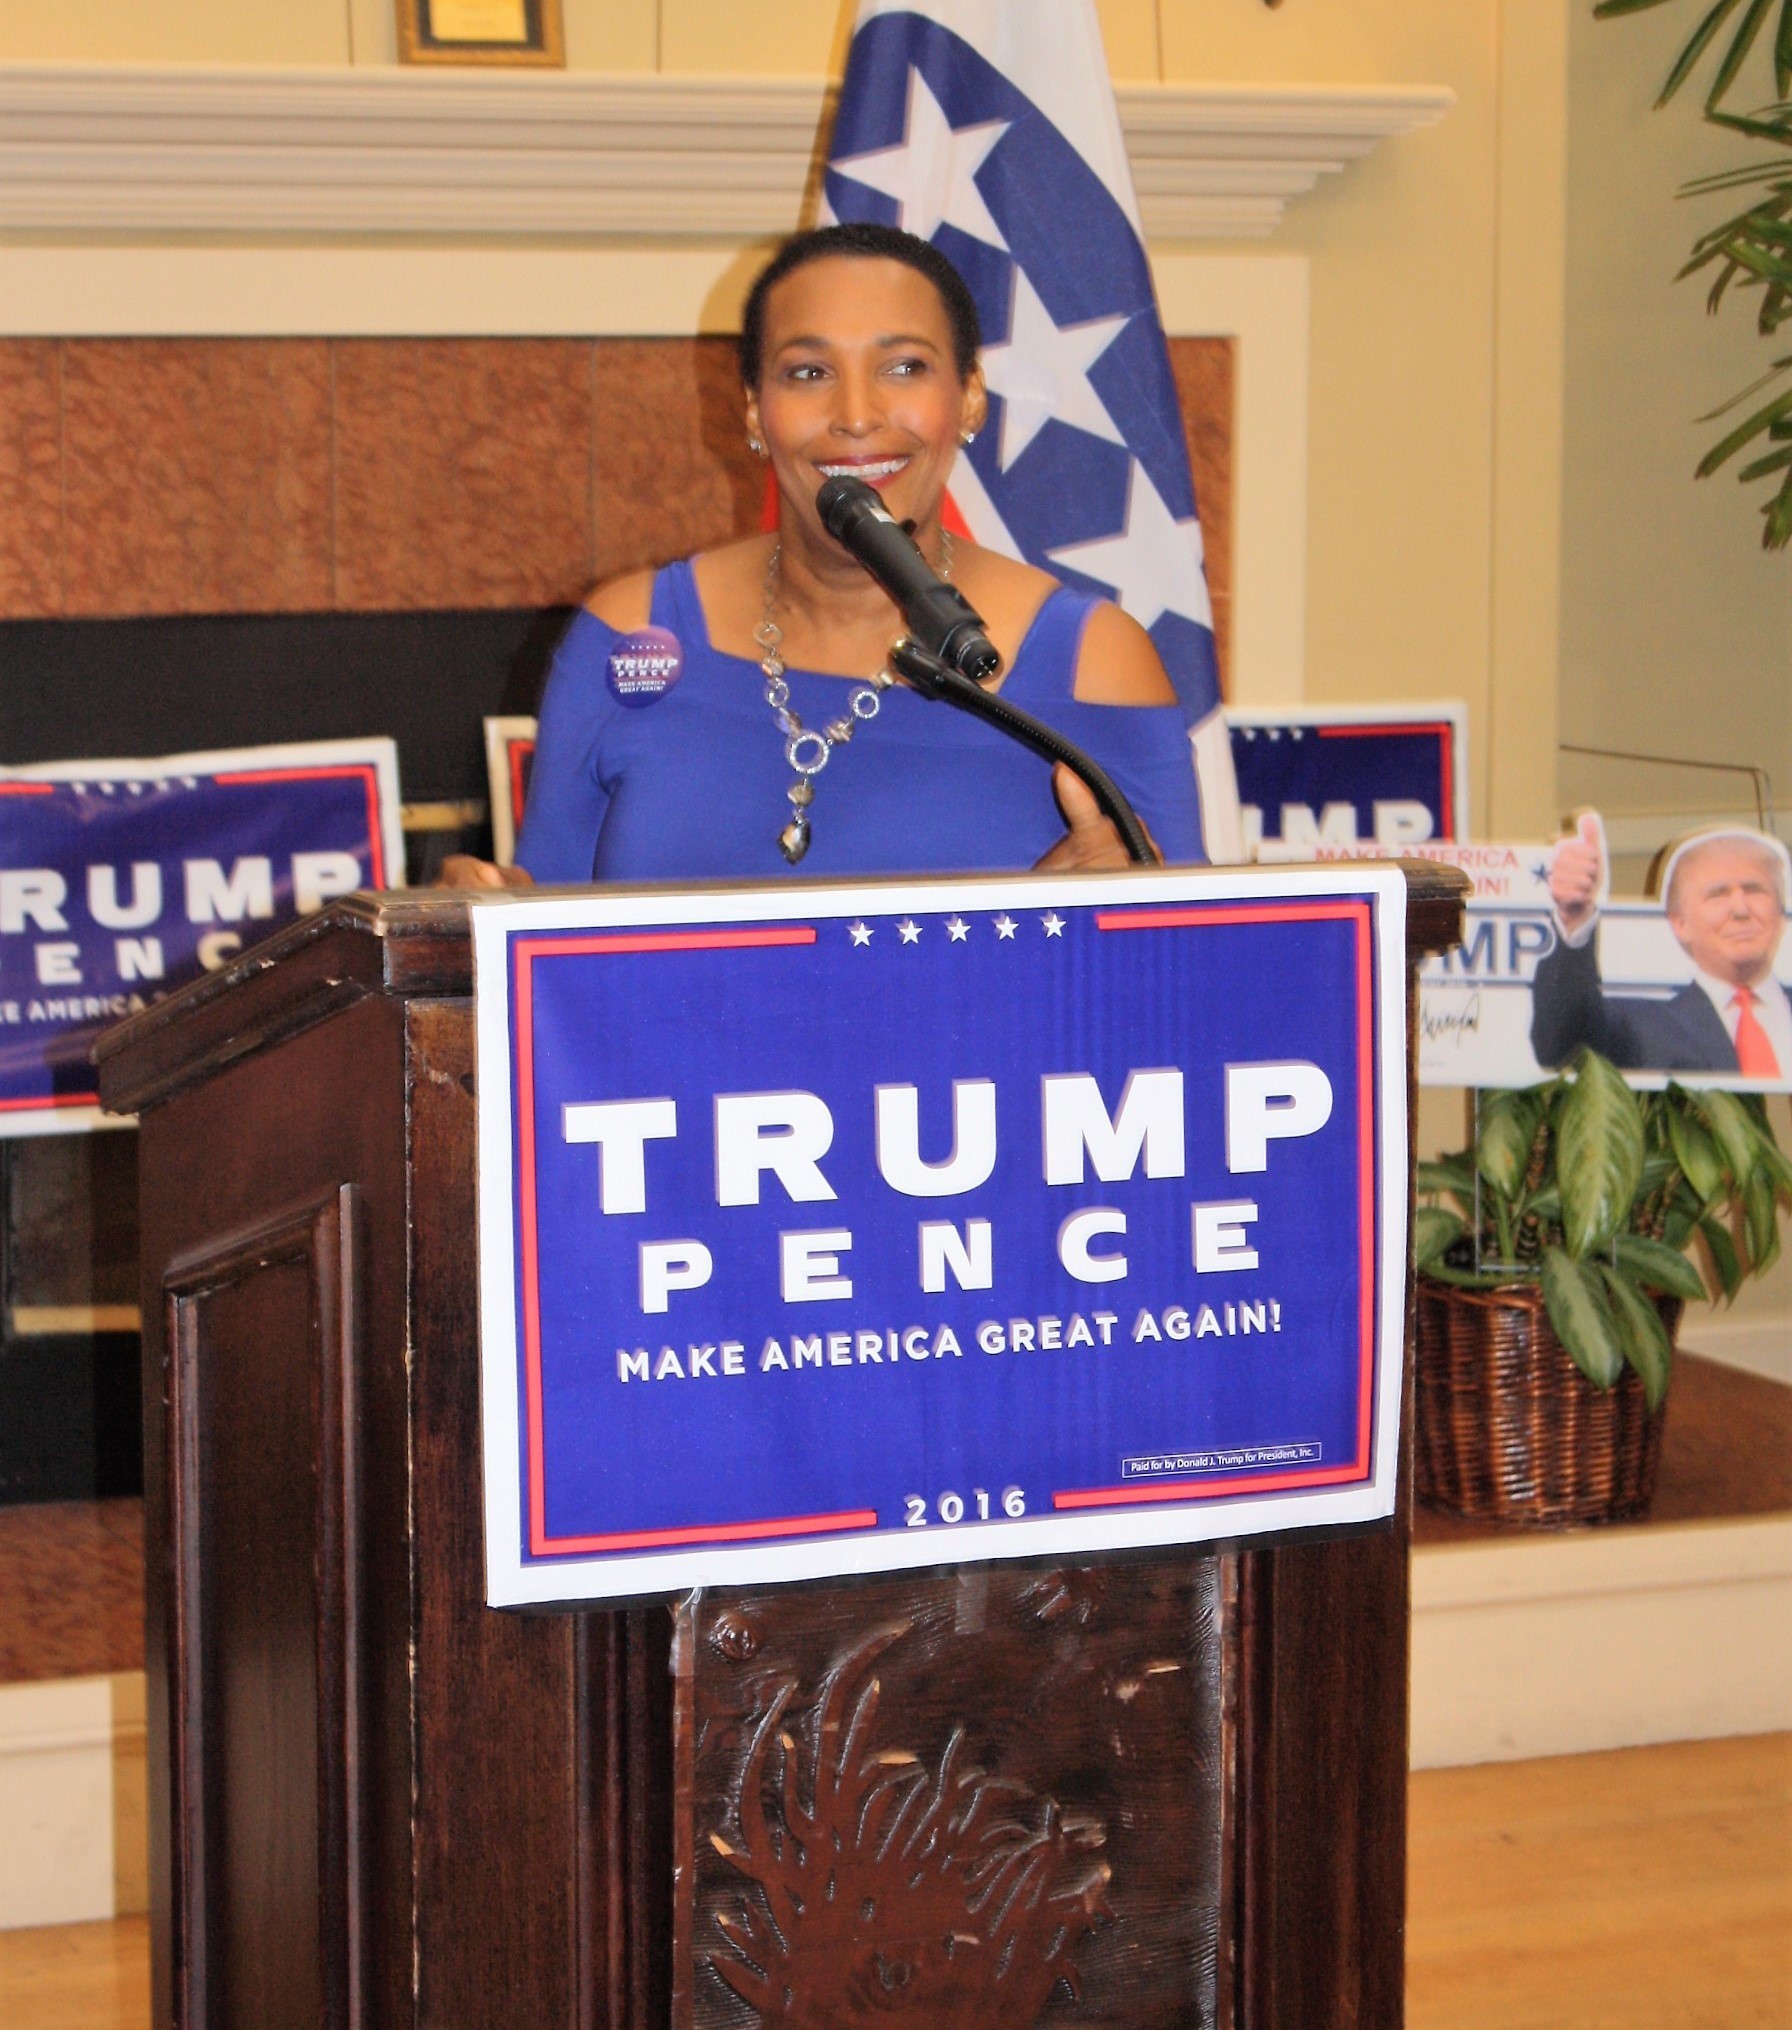 Congressional candidate and Trump supporter Glo Smith